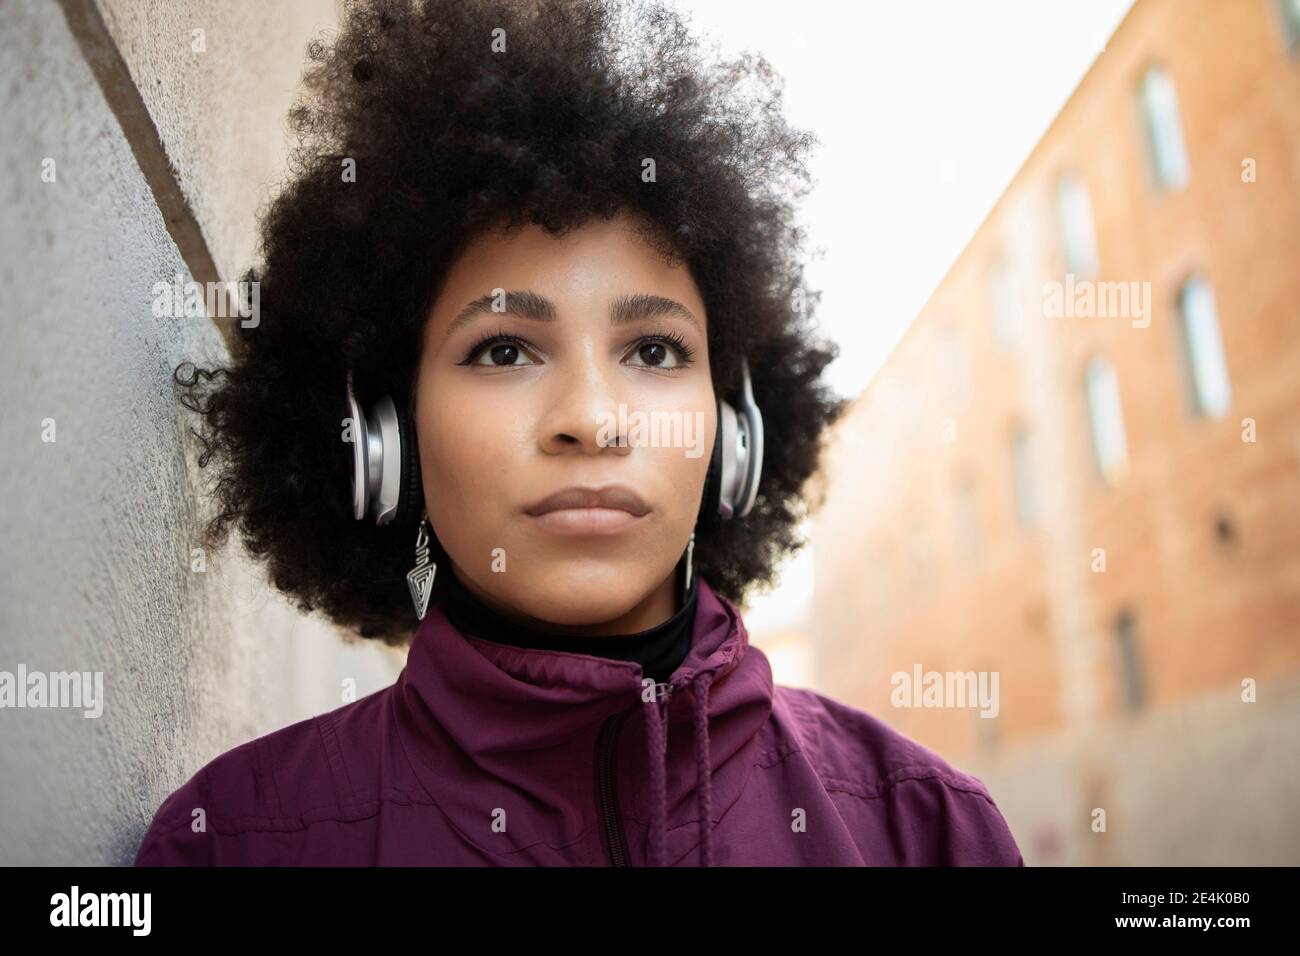 Cheerful woman wearing headphones against built structure Stock Photo